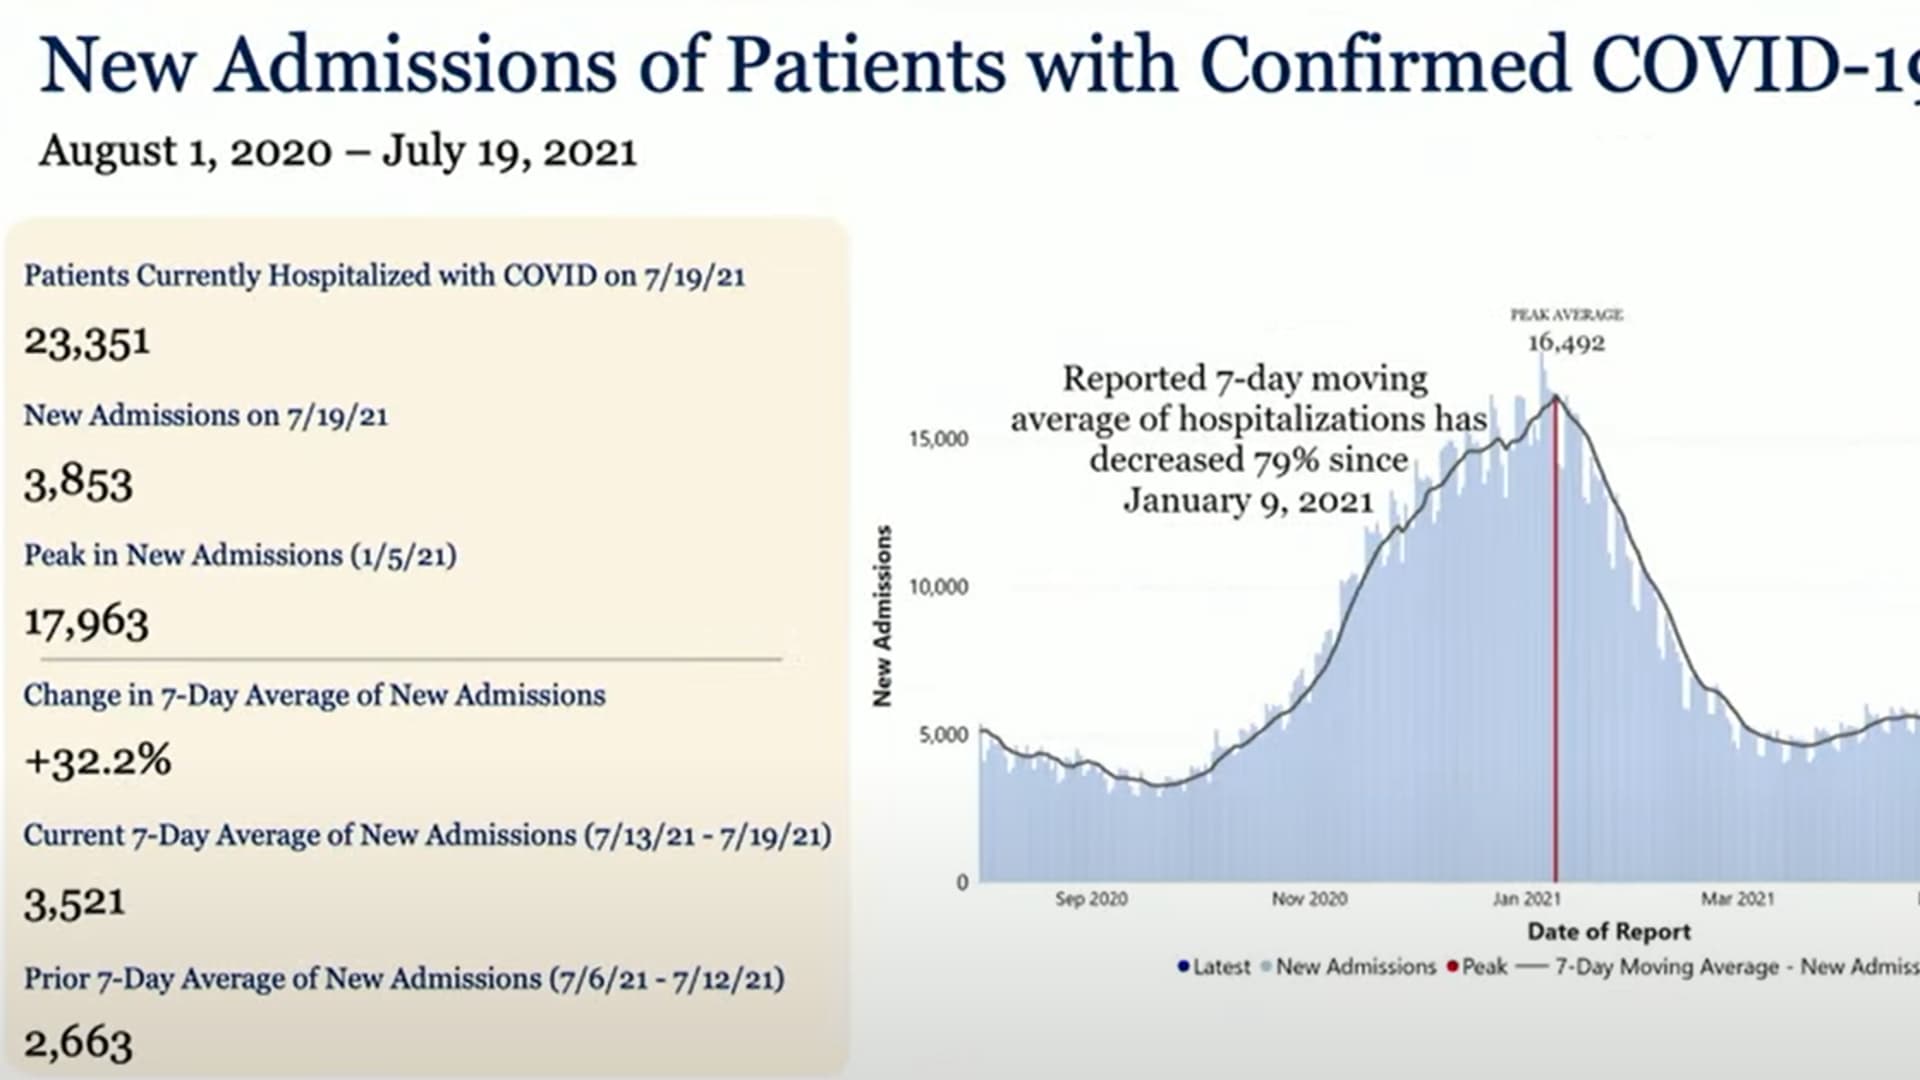 Chart shows current data on Covid-19 in the United States.